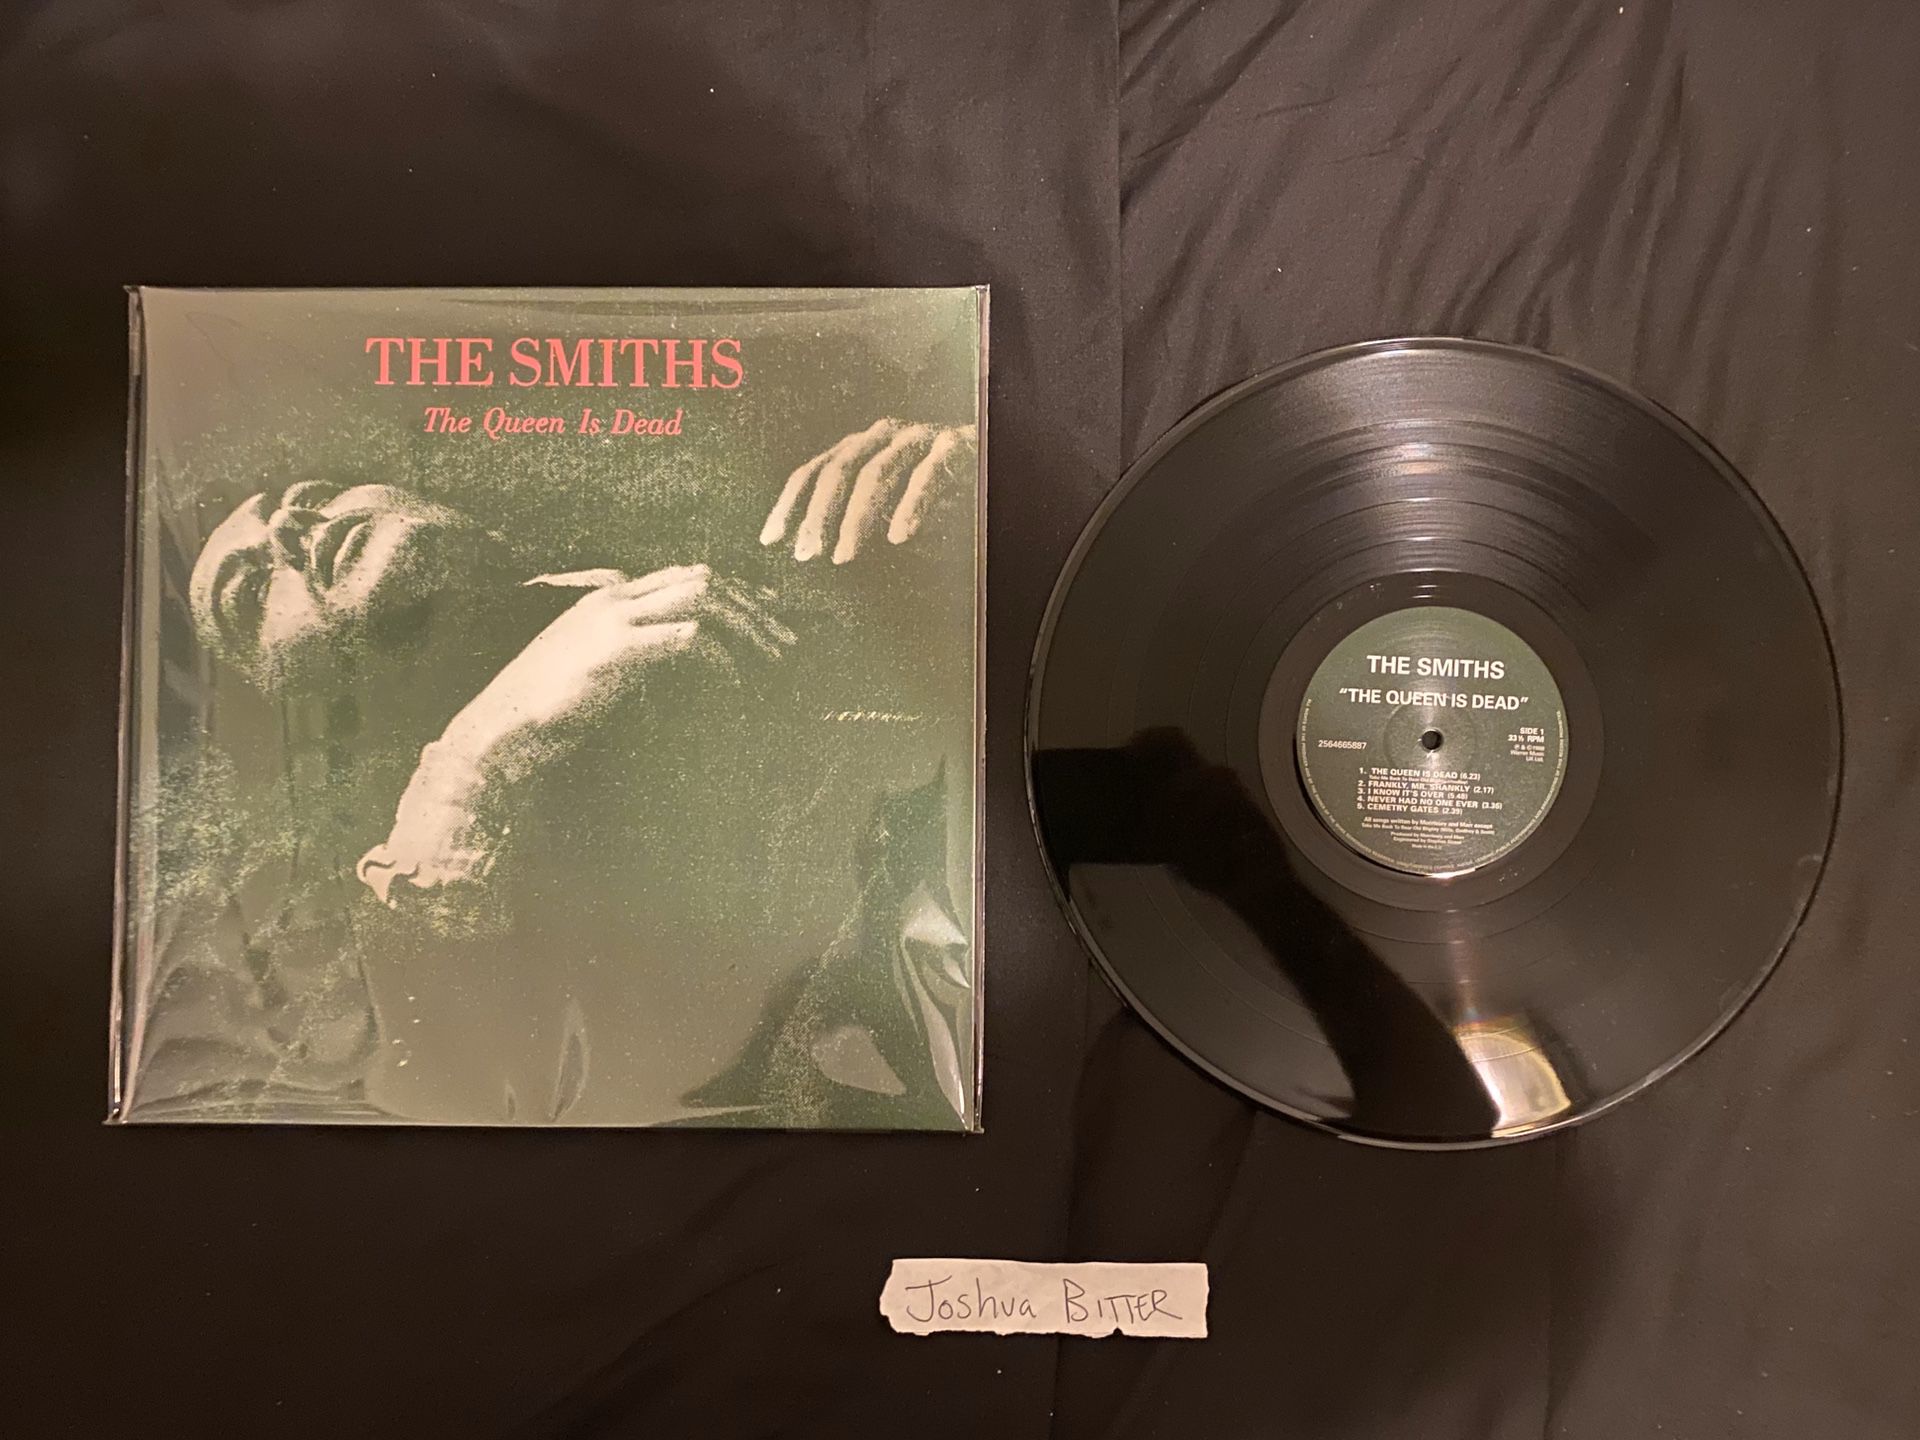 The Smiths The Queen Is Dead Vinyl Record LP Morrissey New Wave Post Punk